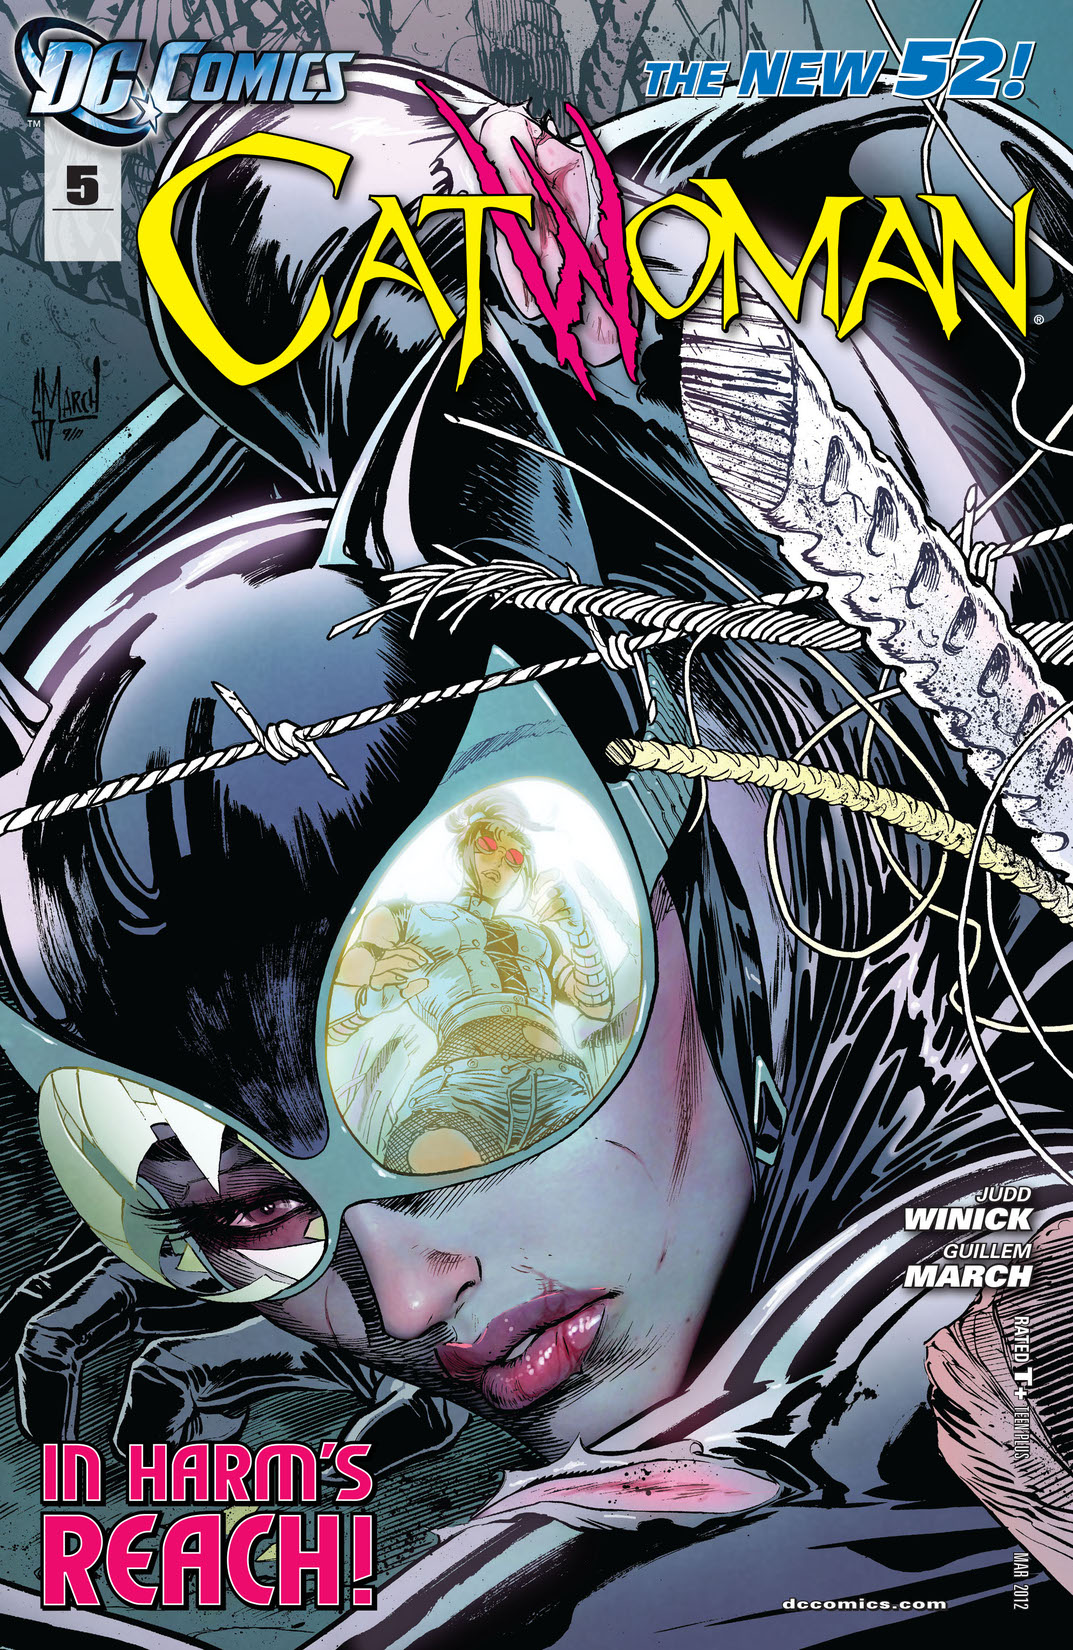 Catwoman (2011-) #5 preview images